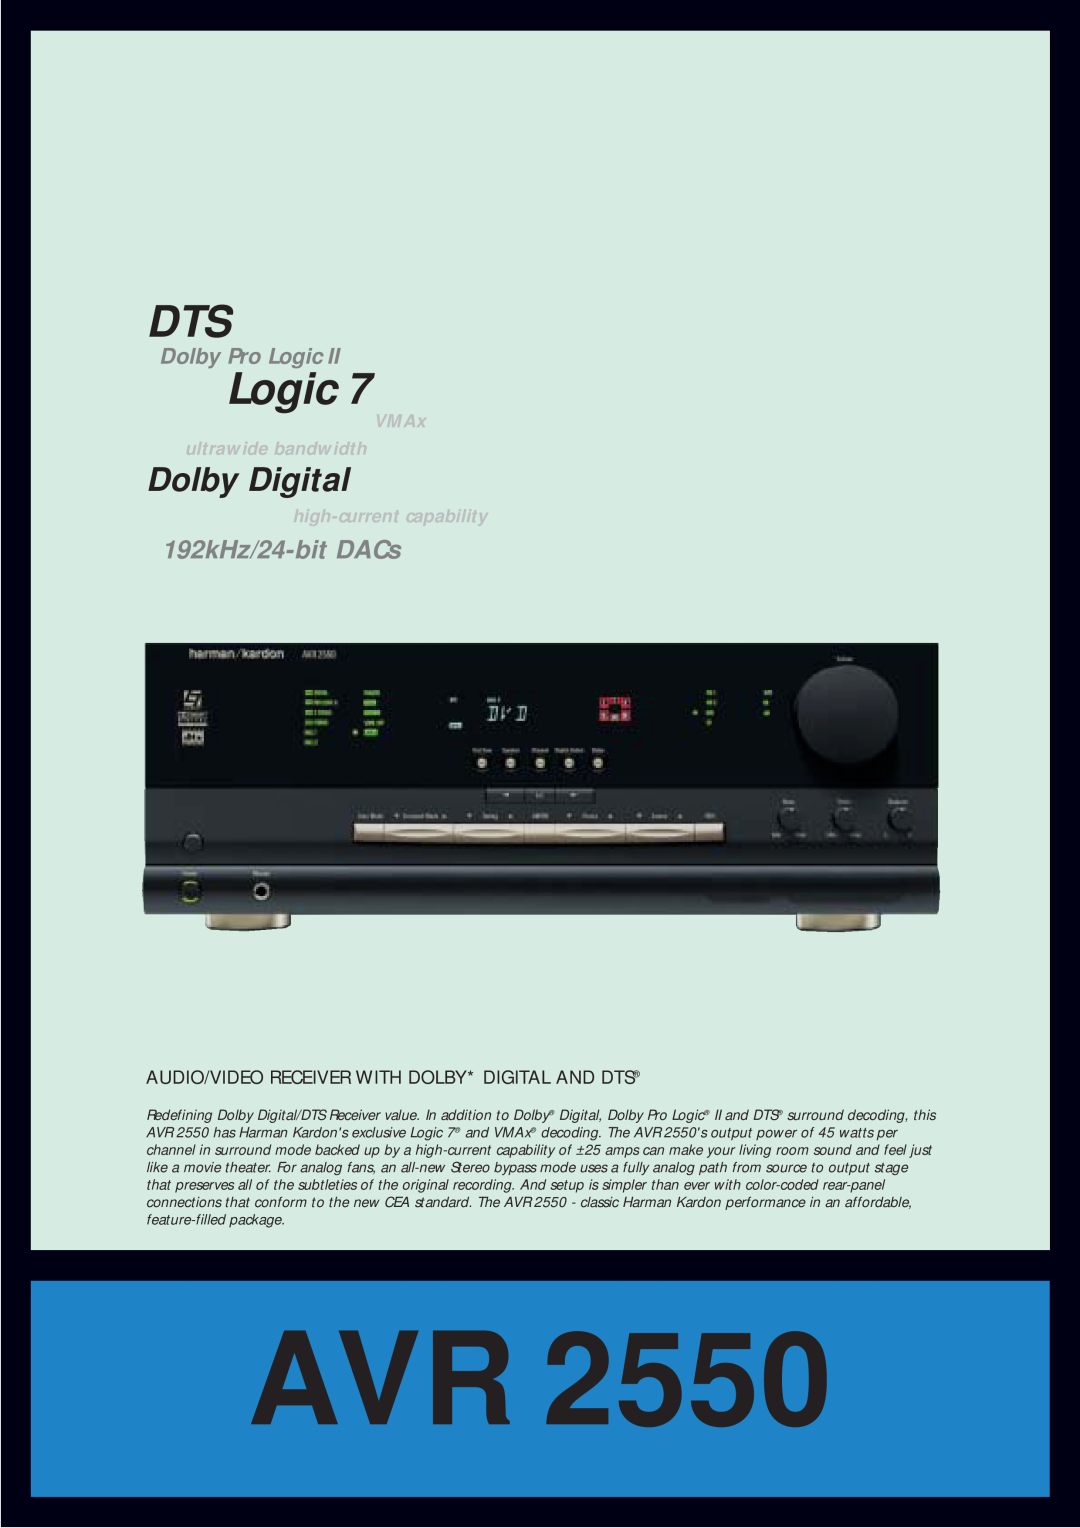 DTS AVR 2550 manual Audio/Video Receiver With Dolby* Digital And Dts, Logic, Dolby Digital, 192kHz/24-bitDACs 